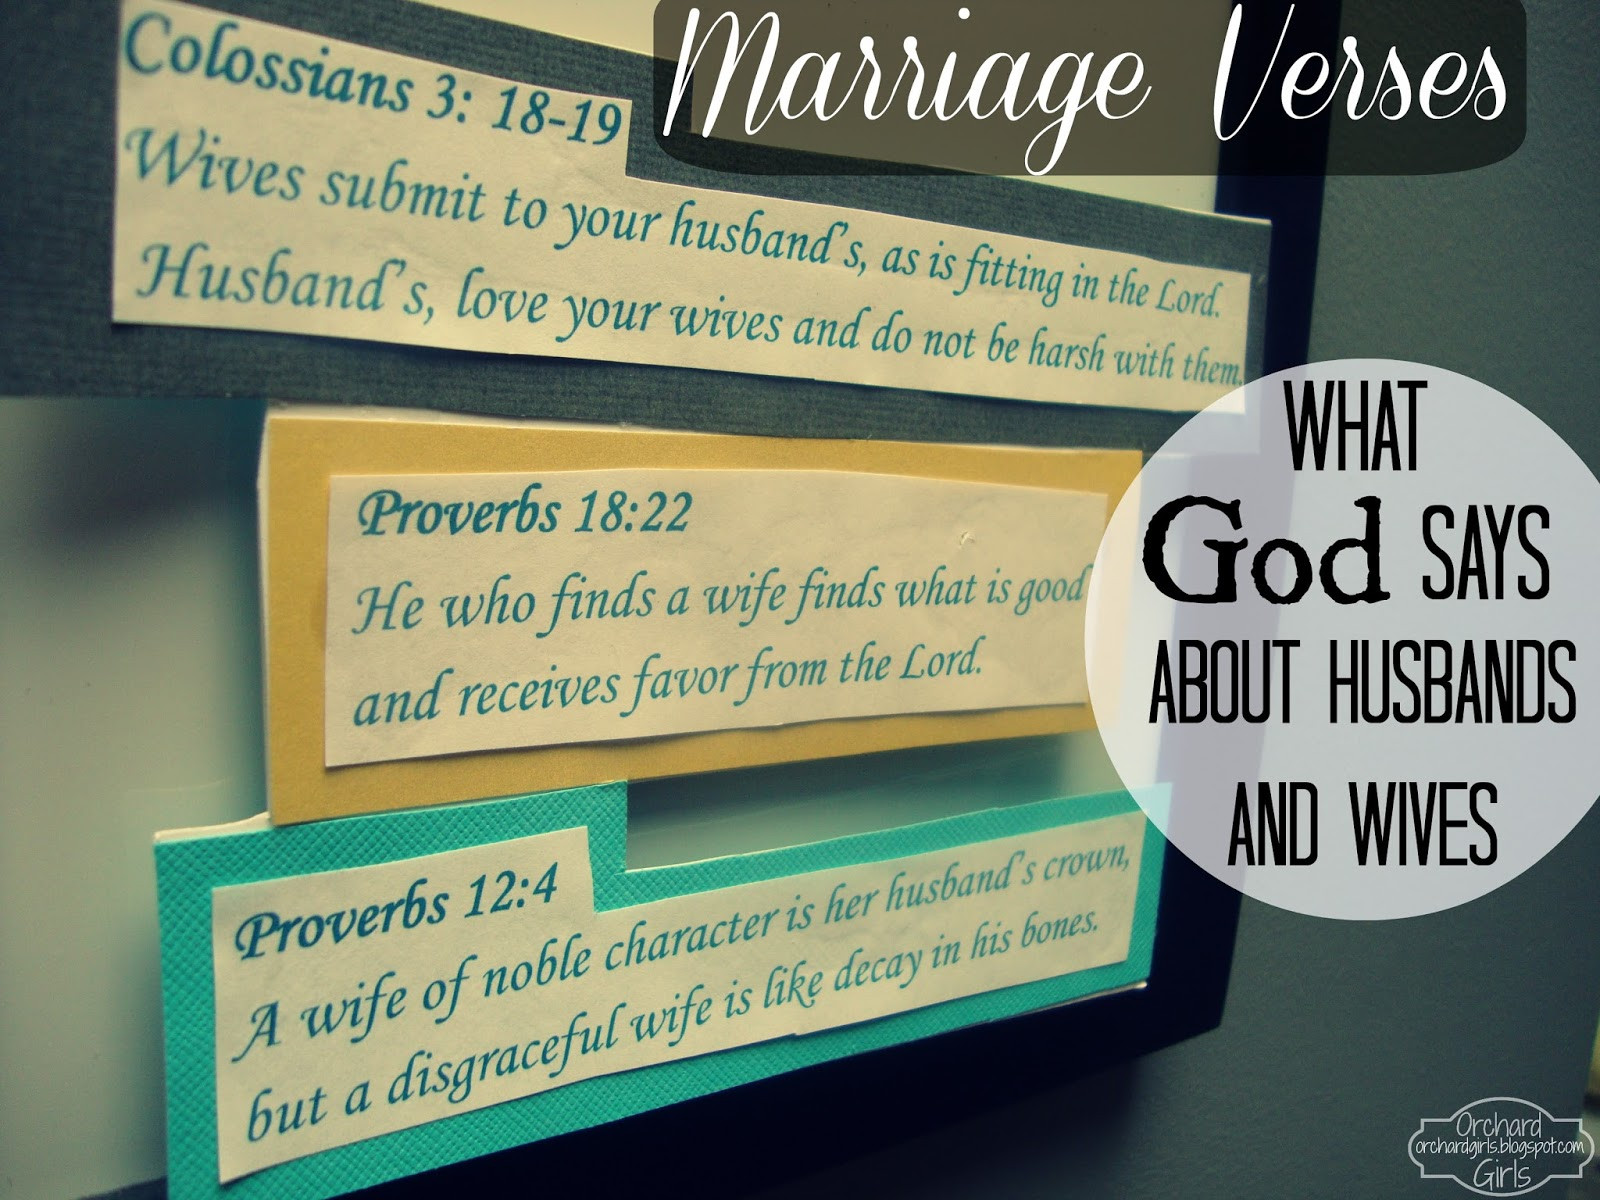 Quotes About Marriage In The Bible
 Orchard Girls "I love you because" Board FREE Printable